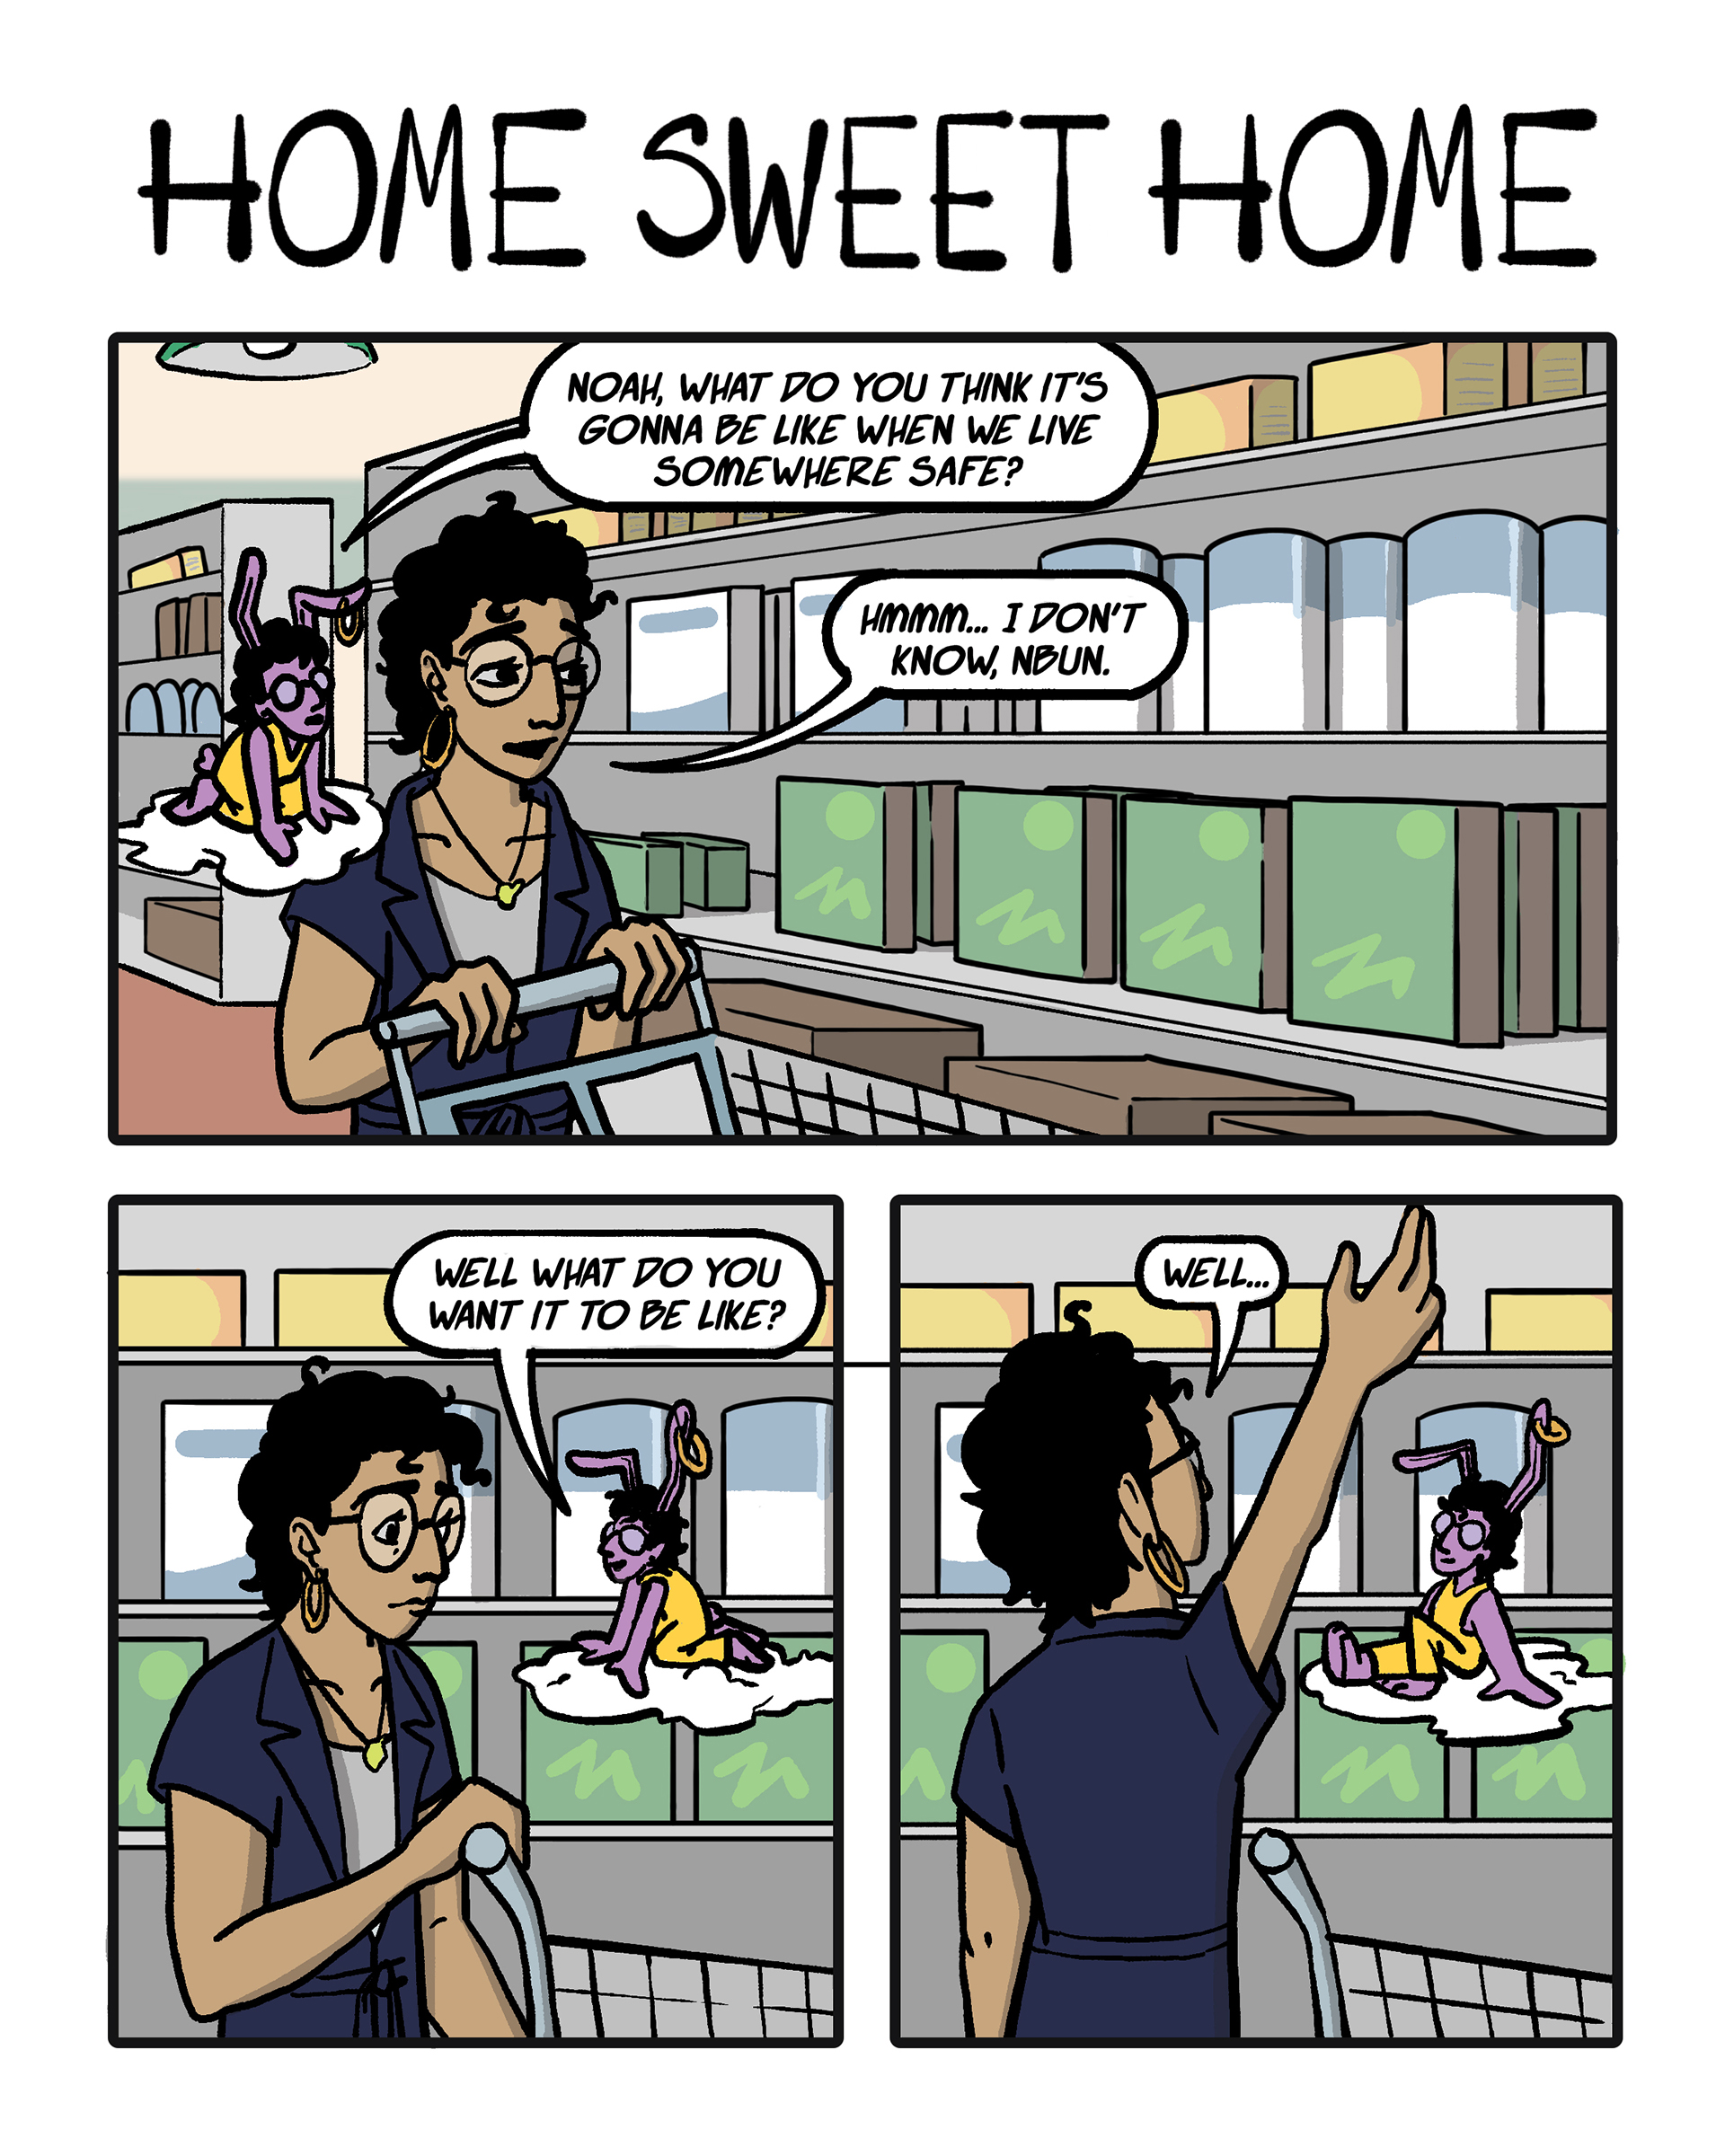 Page 1 from Ideal Home, digital comic by Noah Laroia-Nguyen.